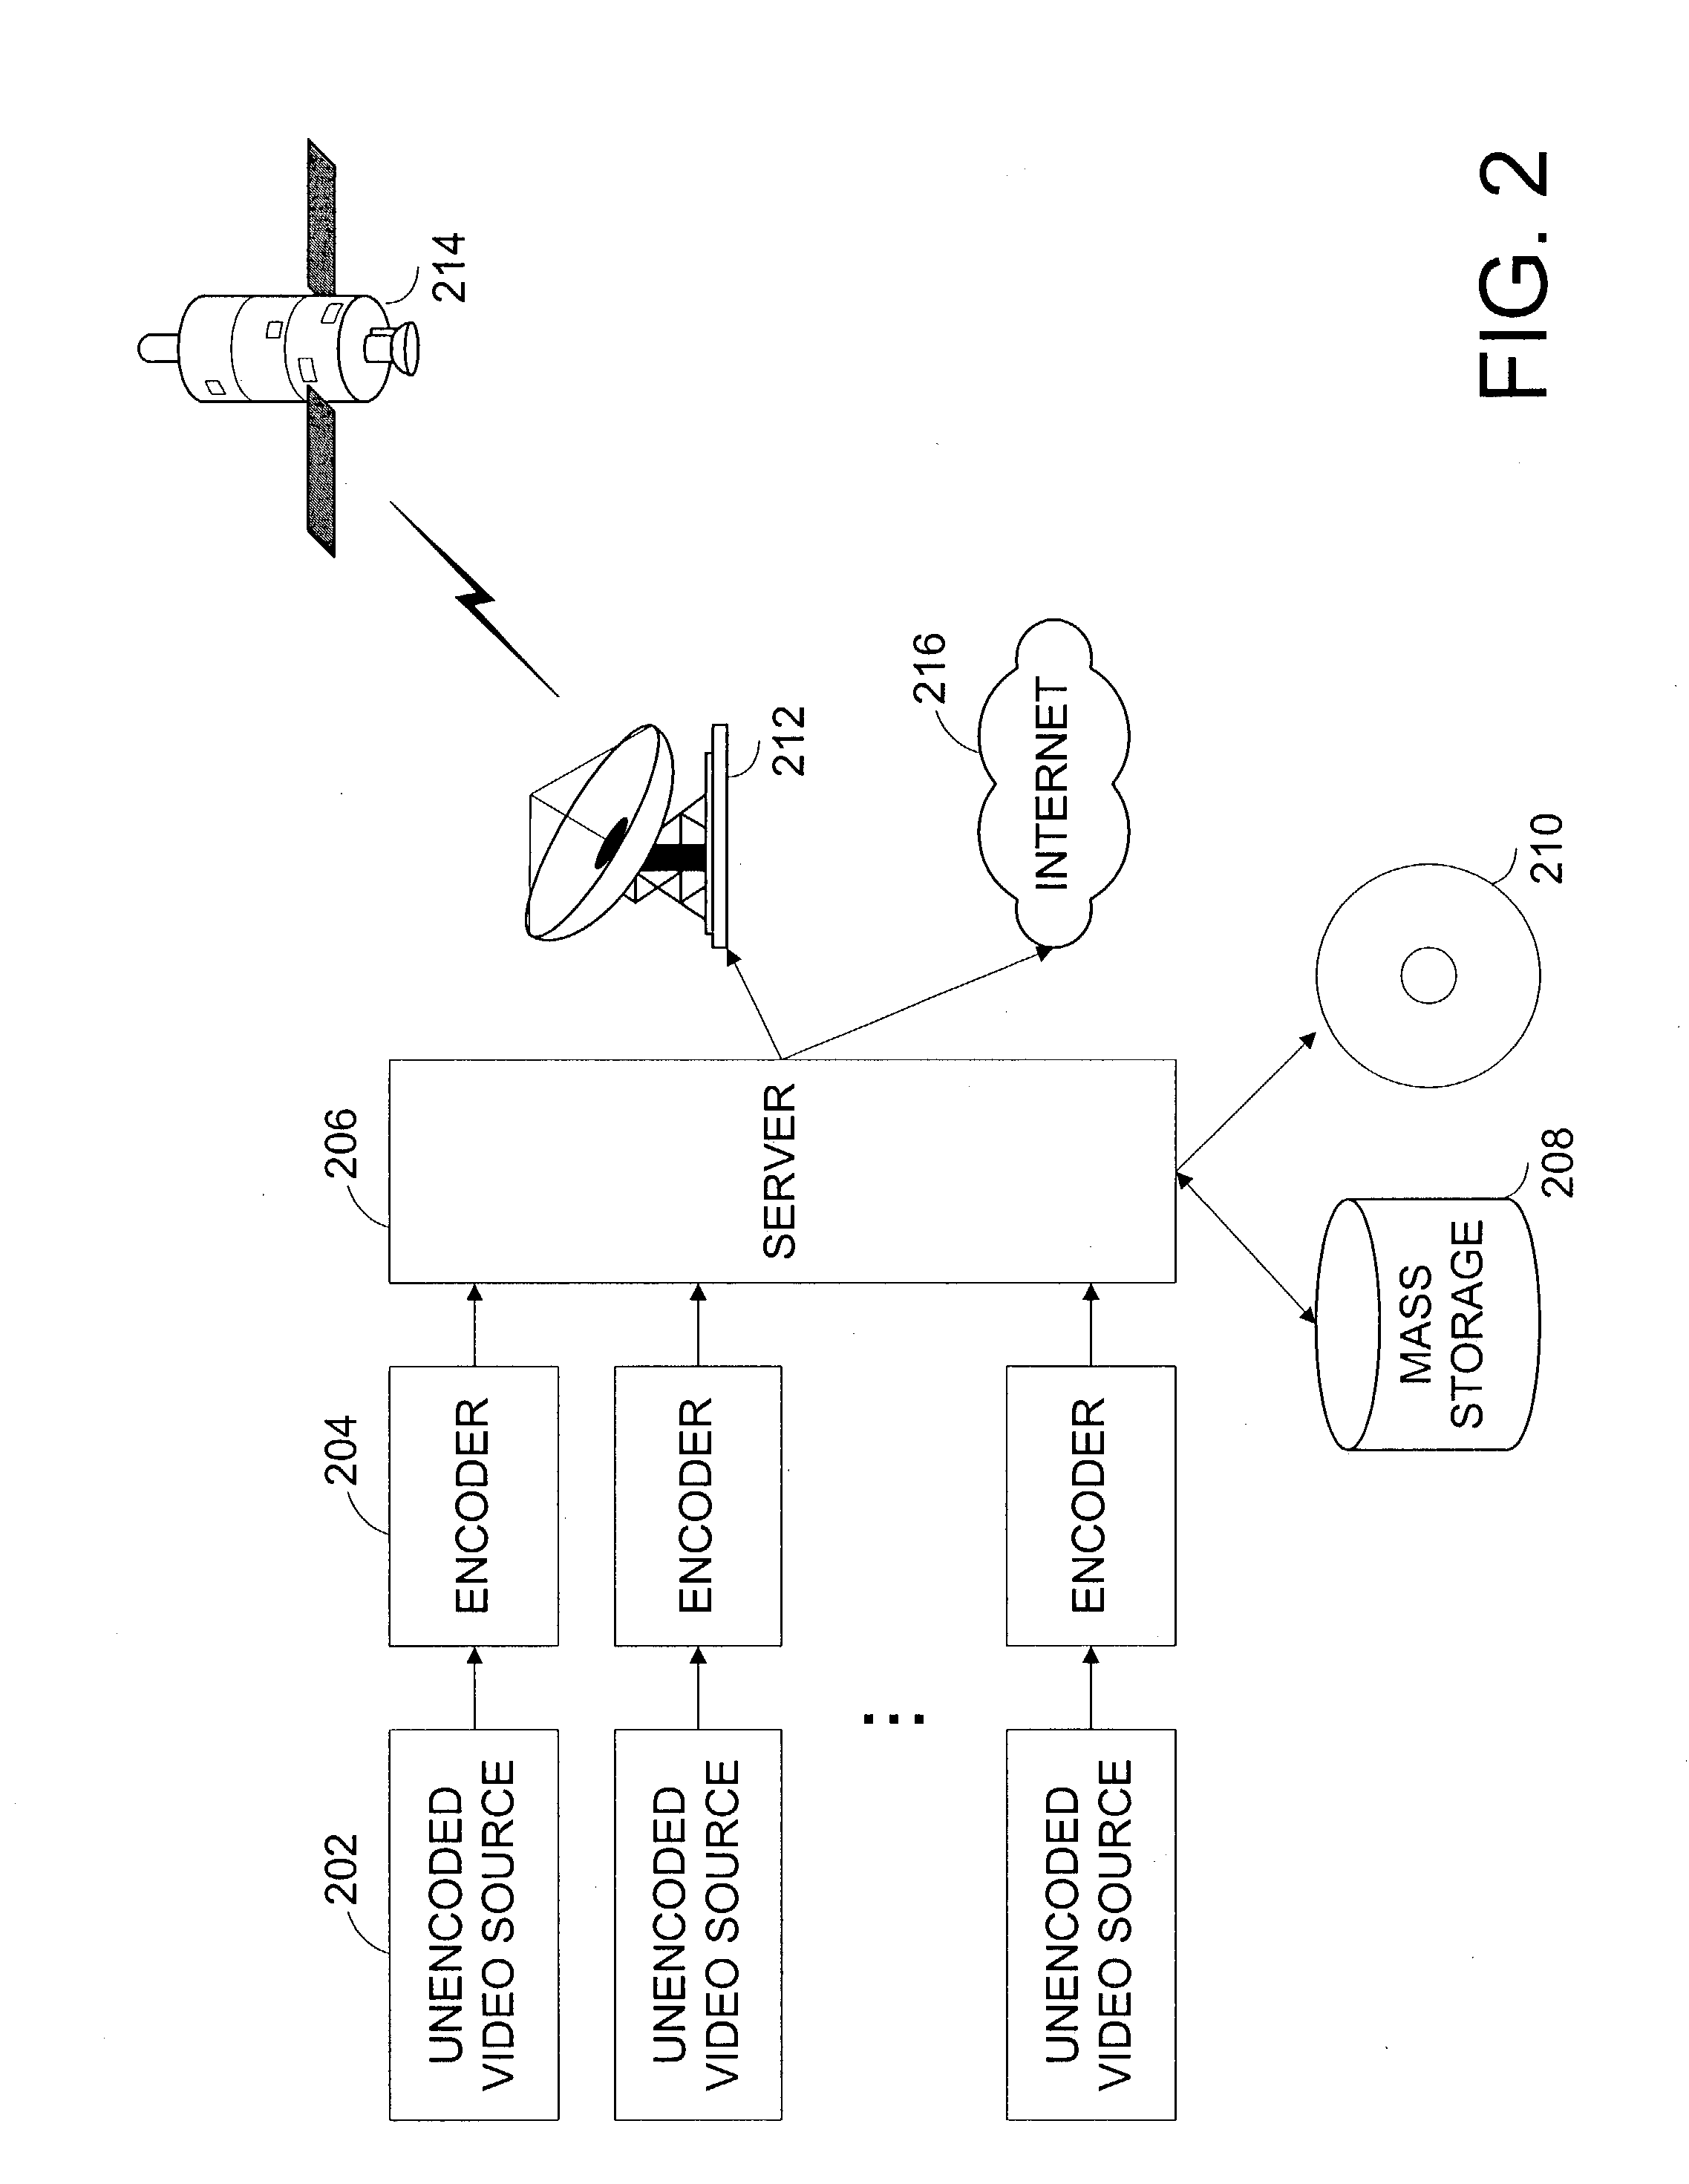 Systems and methods for resetting rate control state variables upon the detection of a scene change within a group of pictures